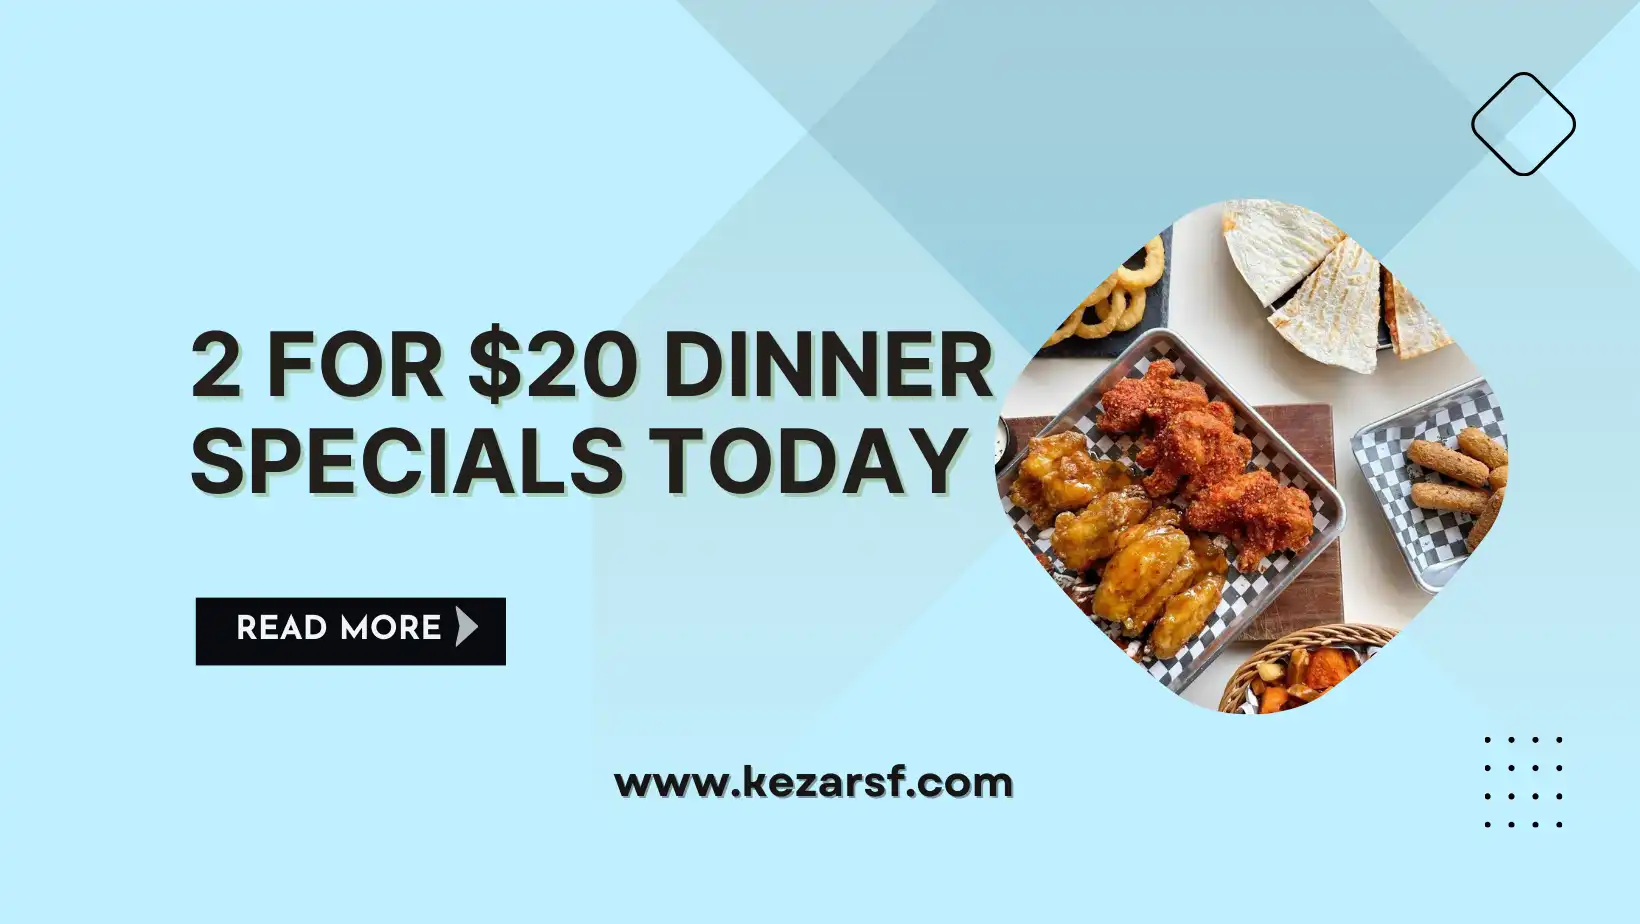 2 For $20 Dinner Specials